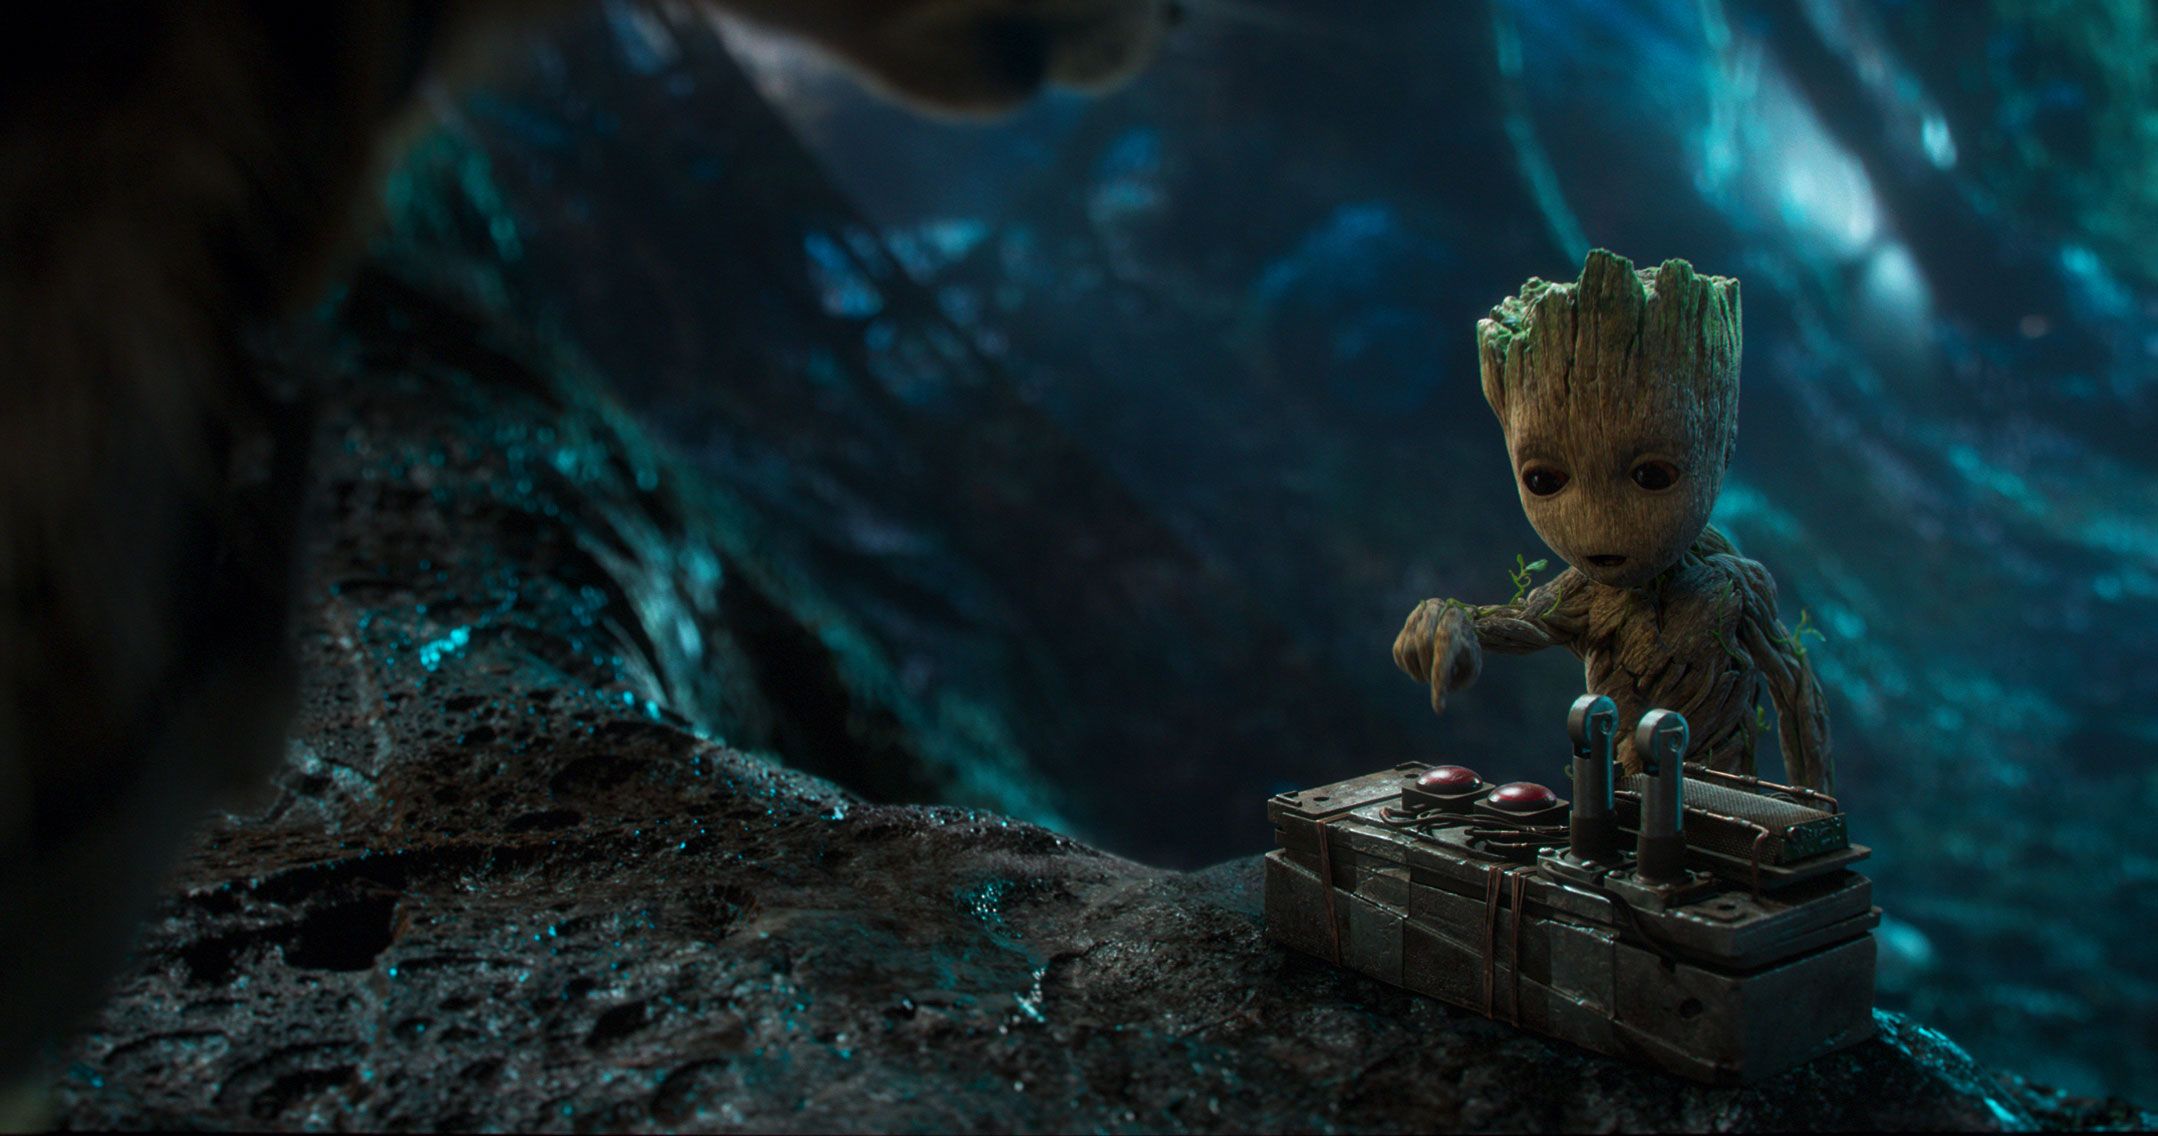 guardians-of-the-galaxy-vol-2-baby-groot